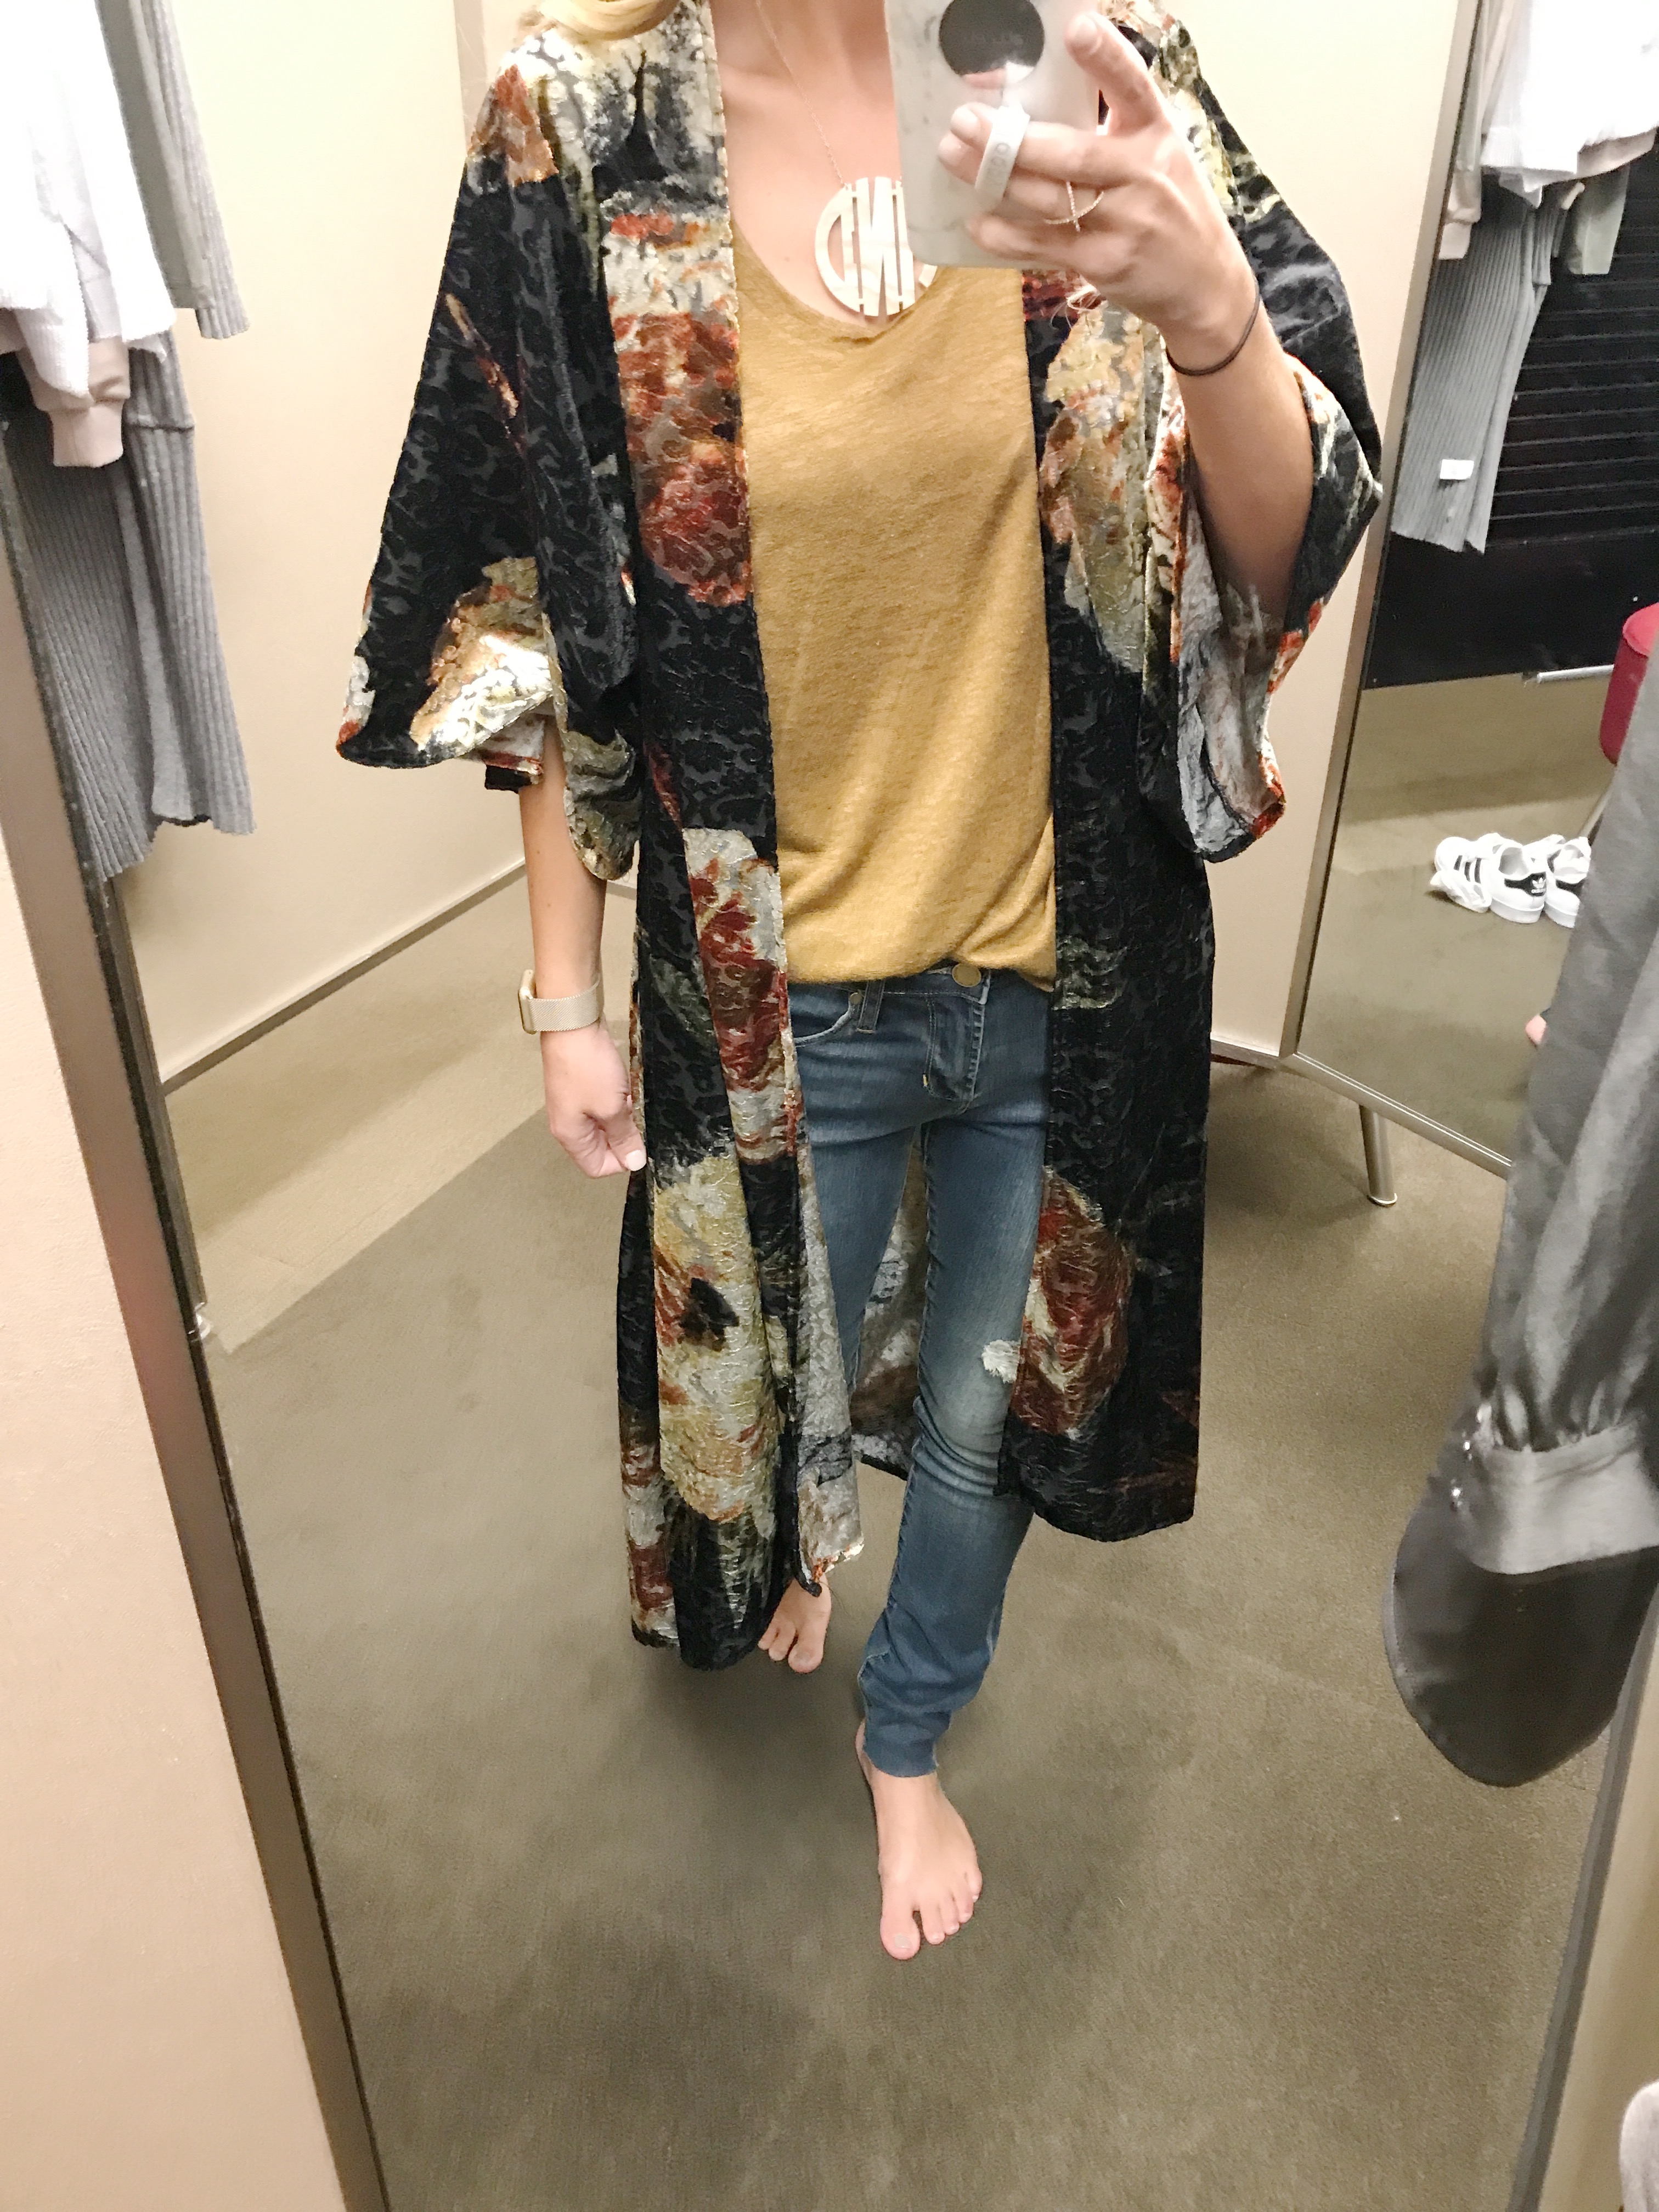 nordstrom try on haul fall clothes and dresses